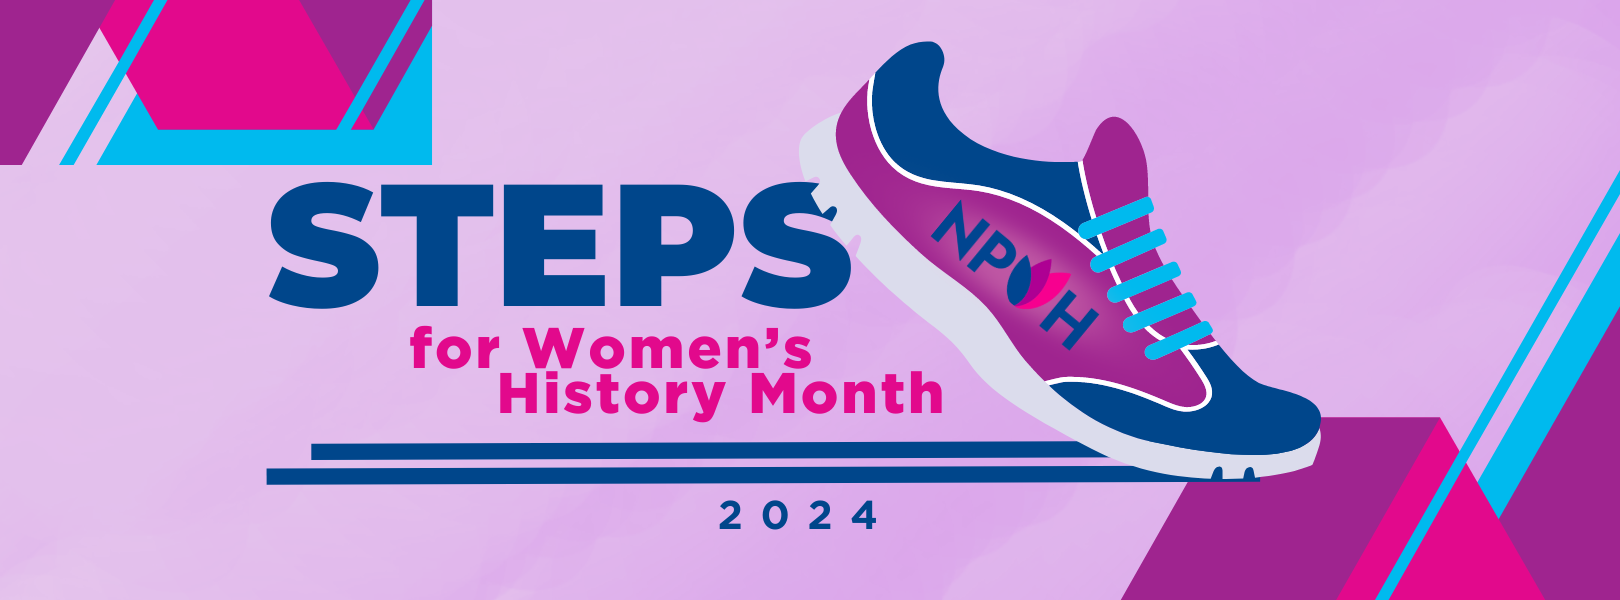 Steps for Women’s History Month: Make History with NPWH